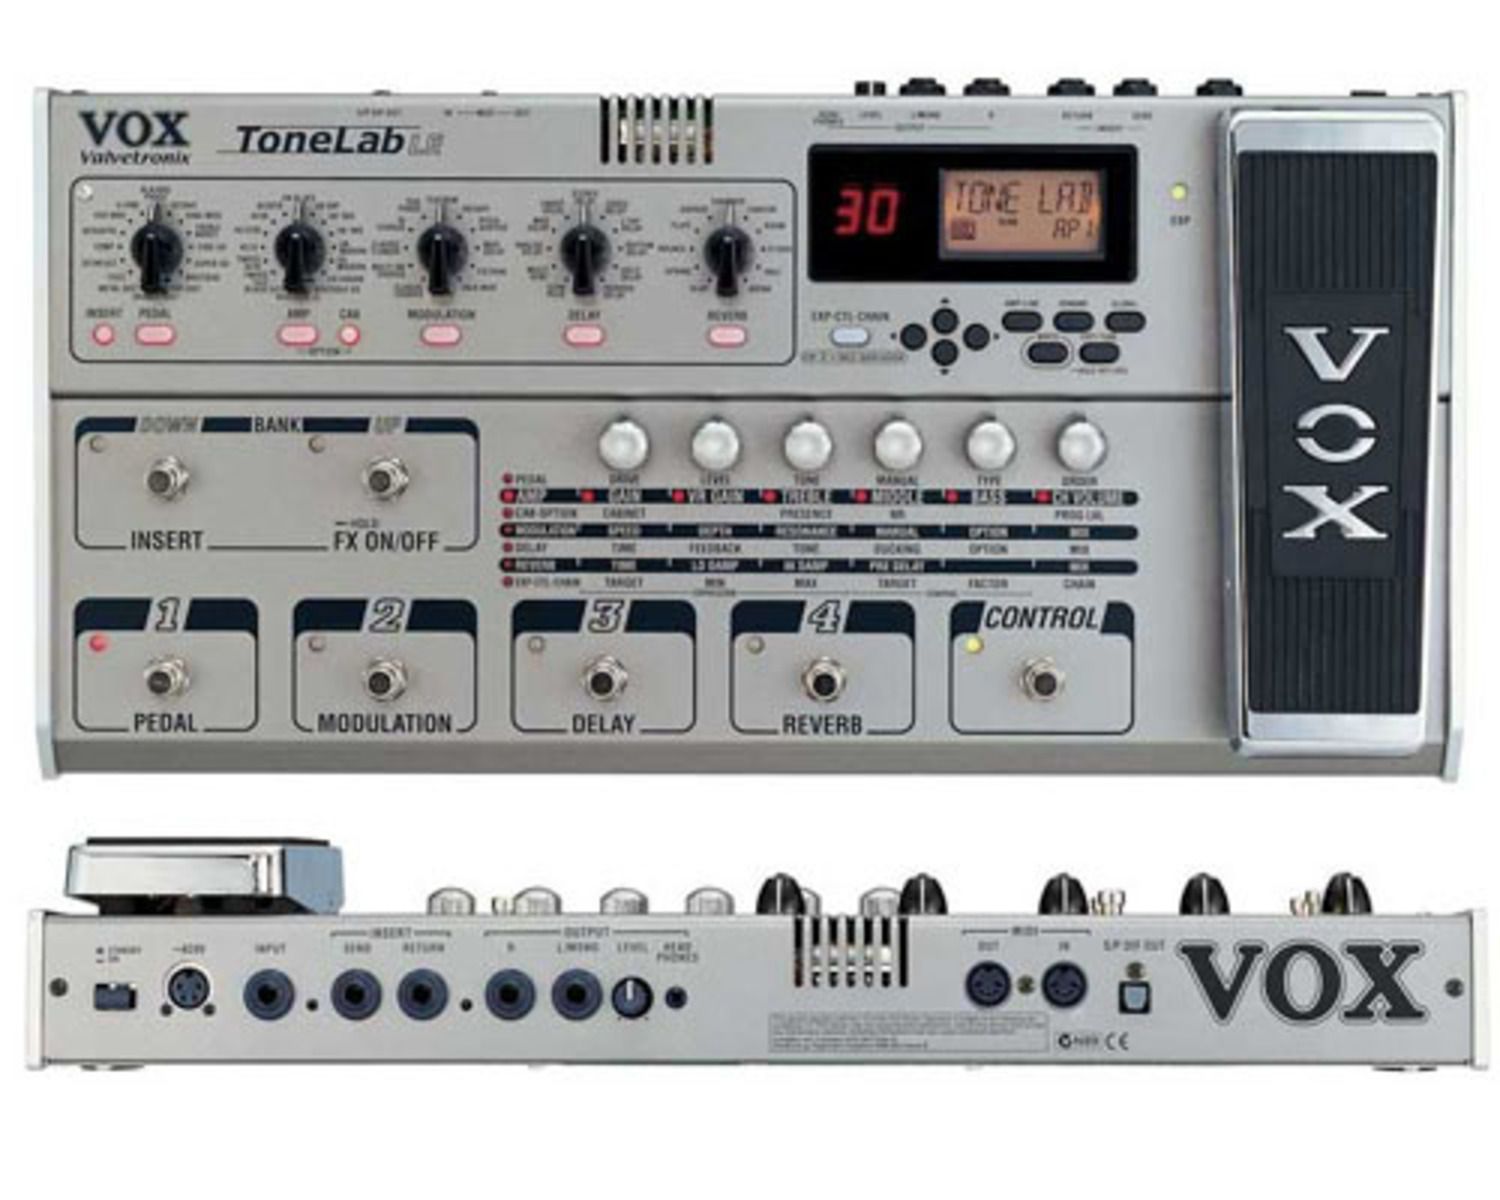 Vox tonelab st patches download for windows 7